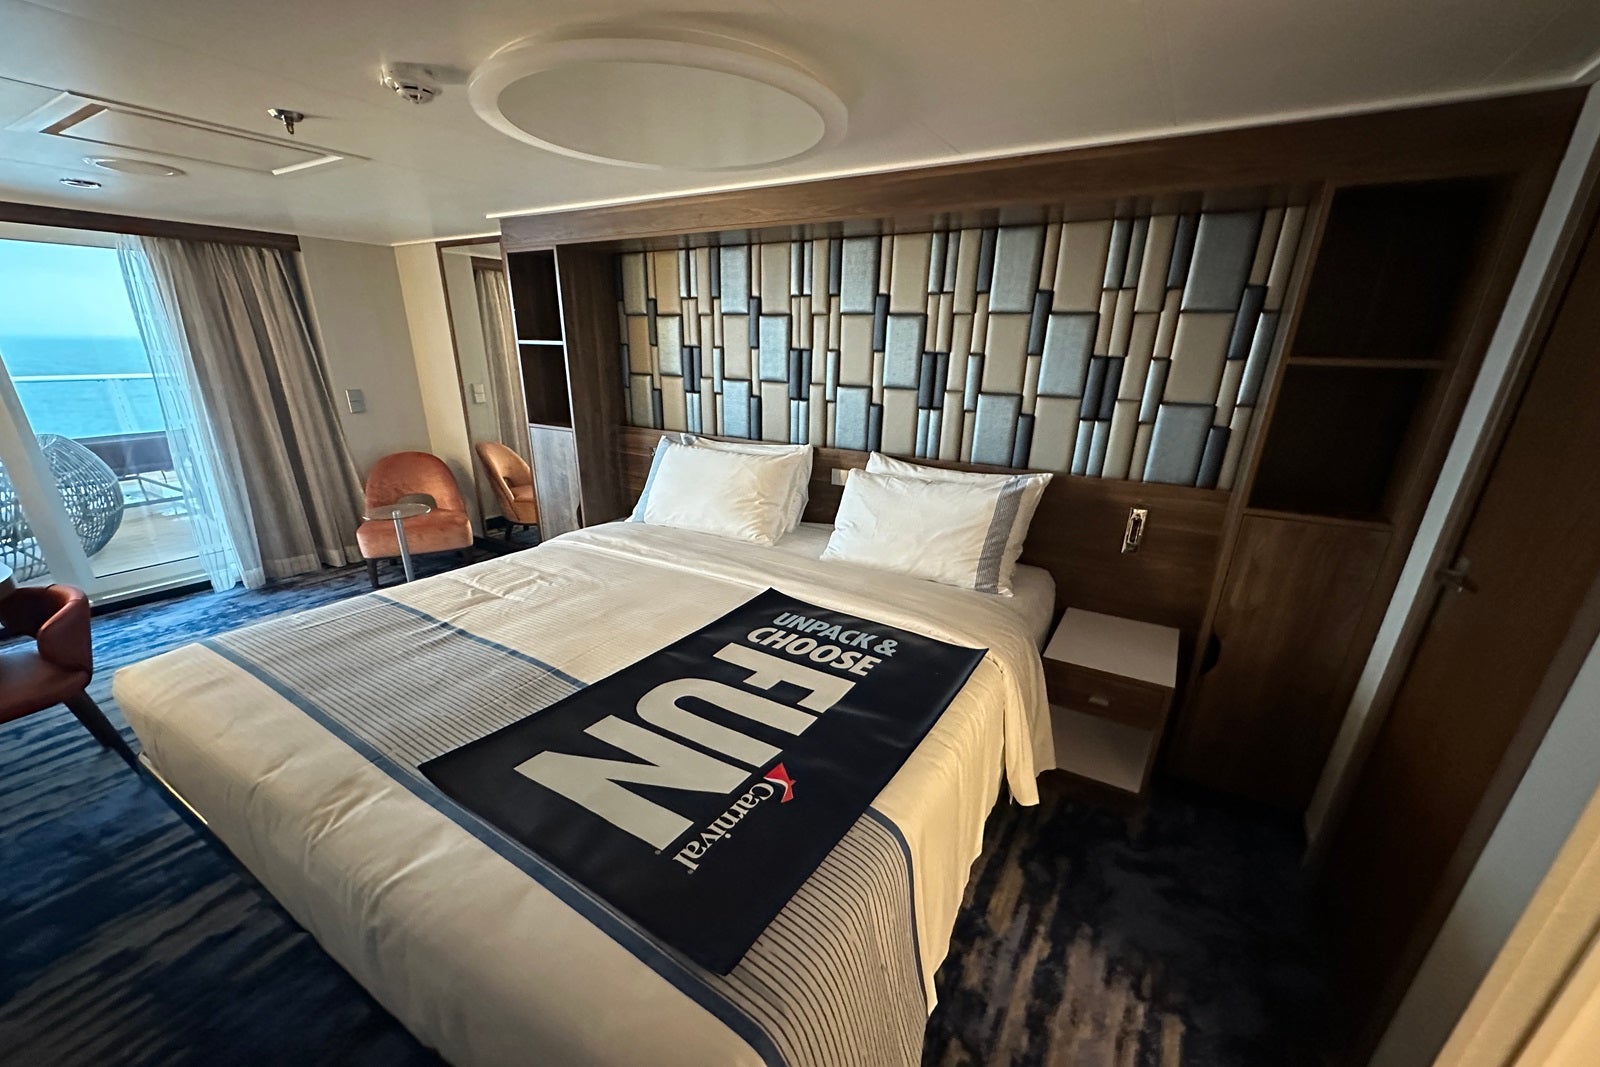 A cruise ship cabin with a bed, a nightstand and a chair with a checkered headboard and a luggage runner that says "Choose fun"